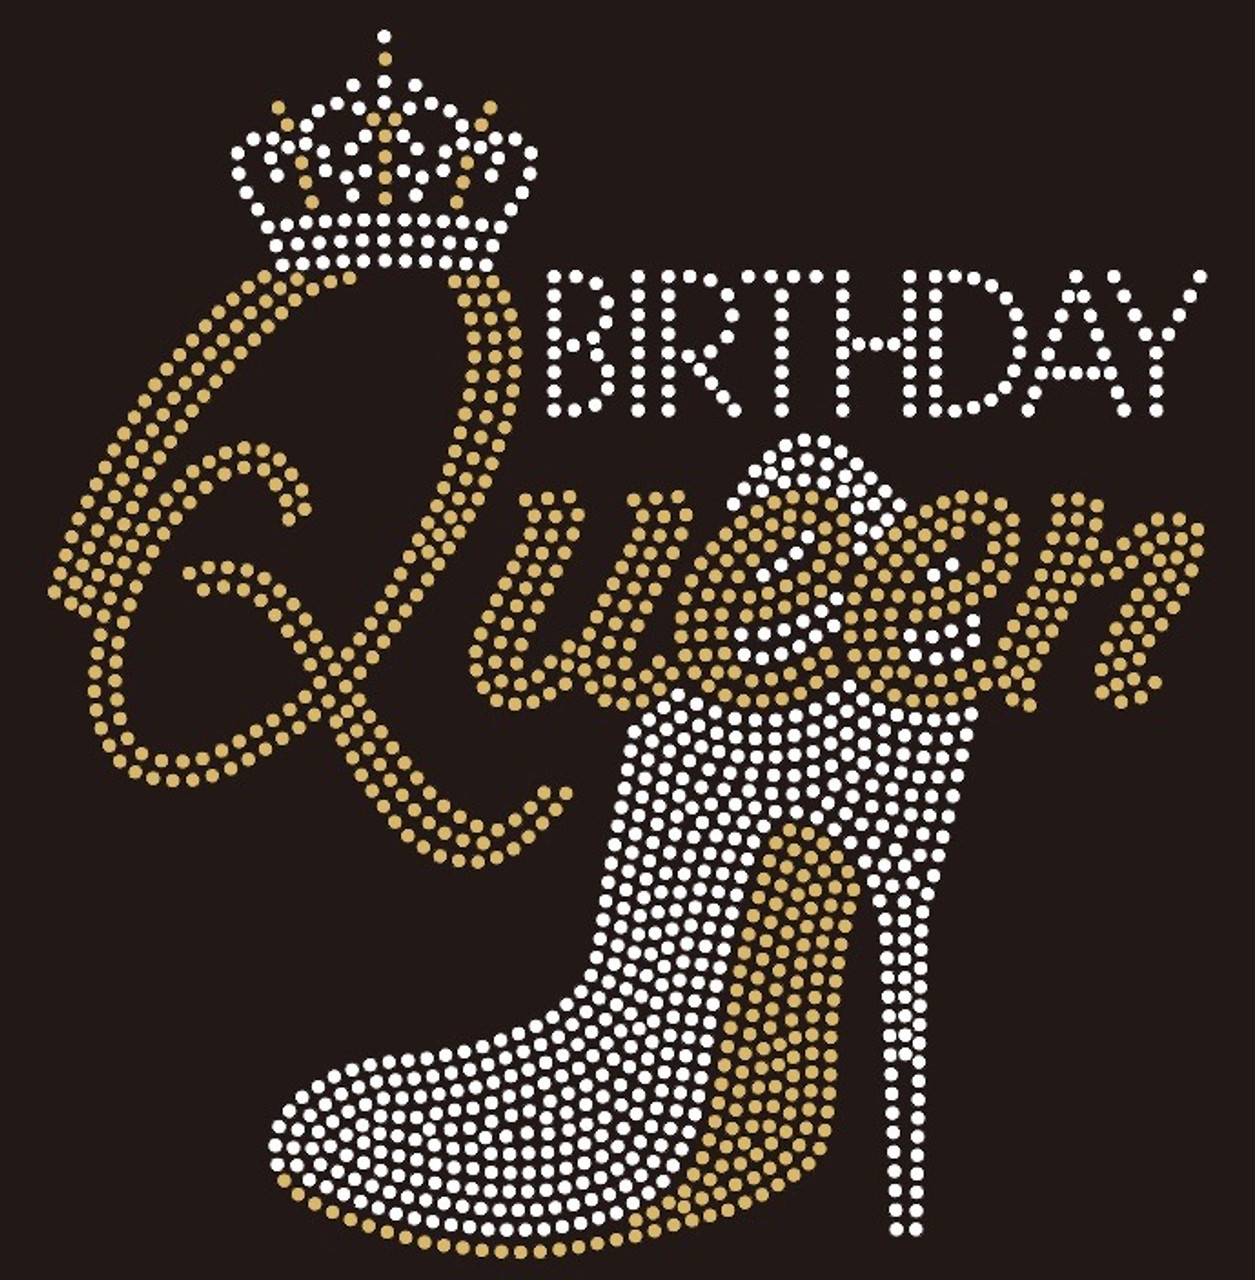 Best 30 Happy Birthday Queen Images Download in 2023  Images Vibe